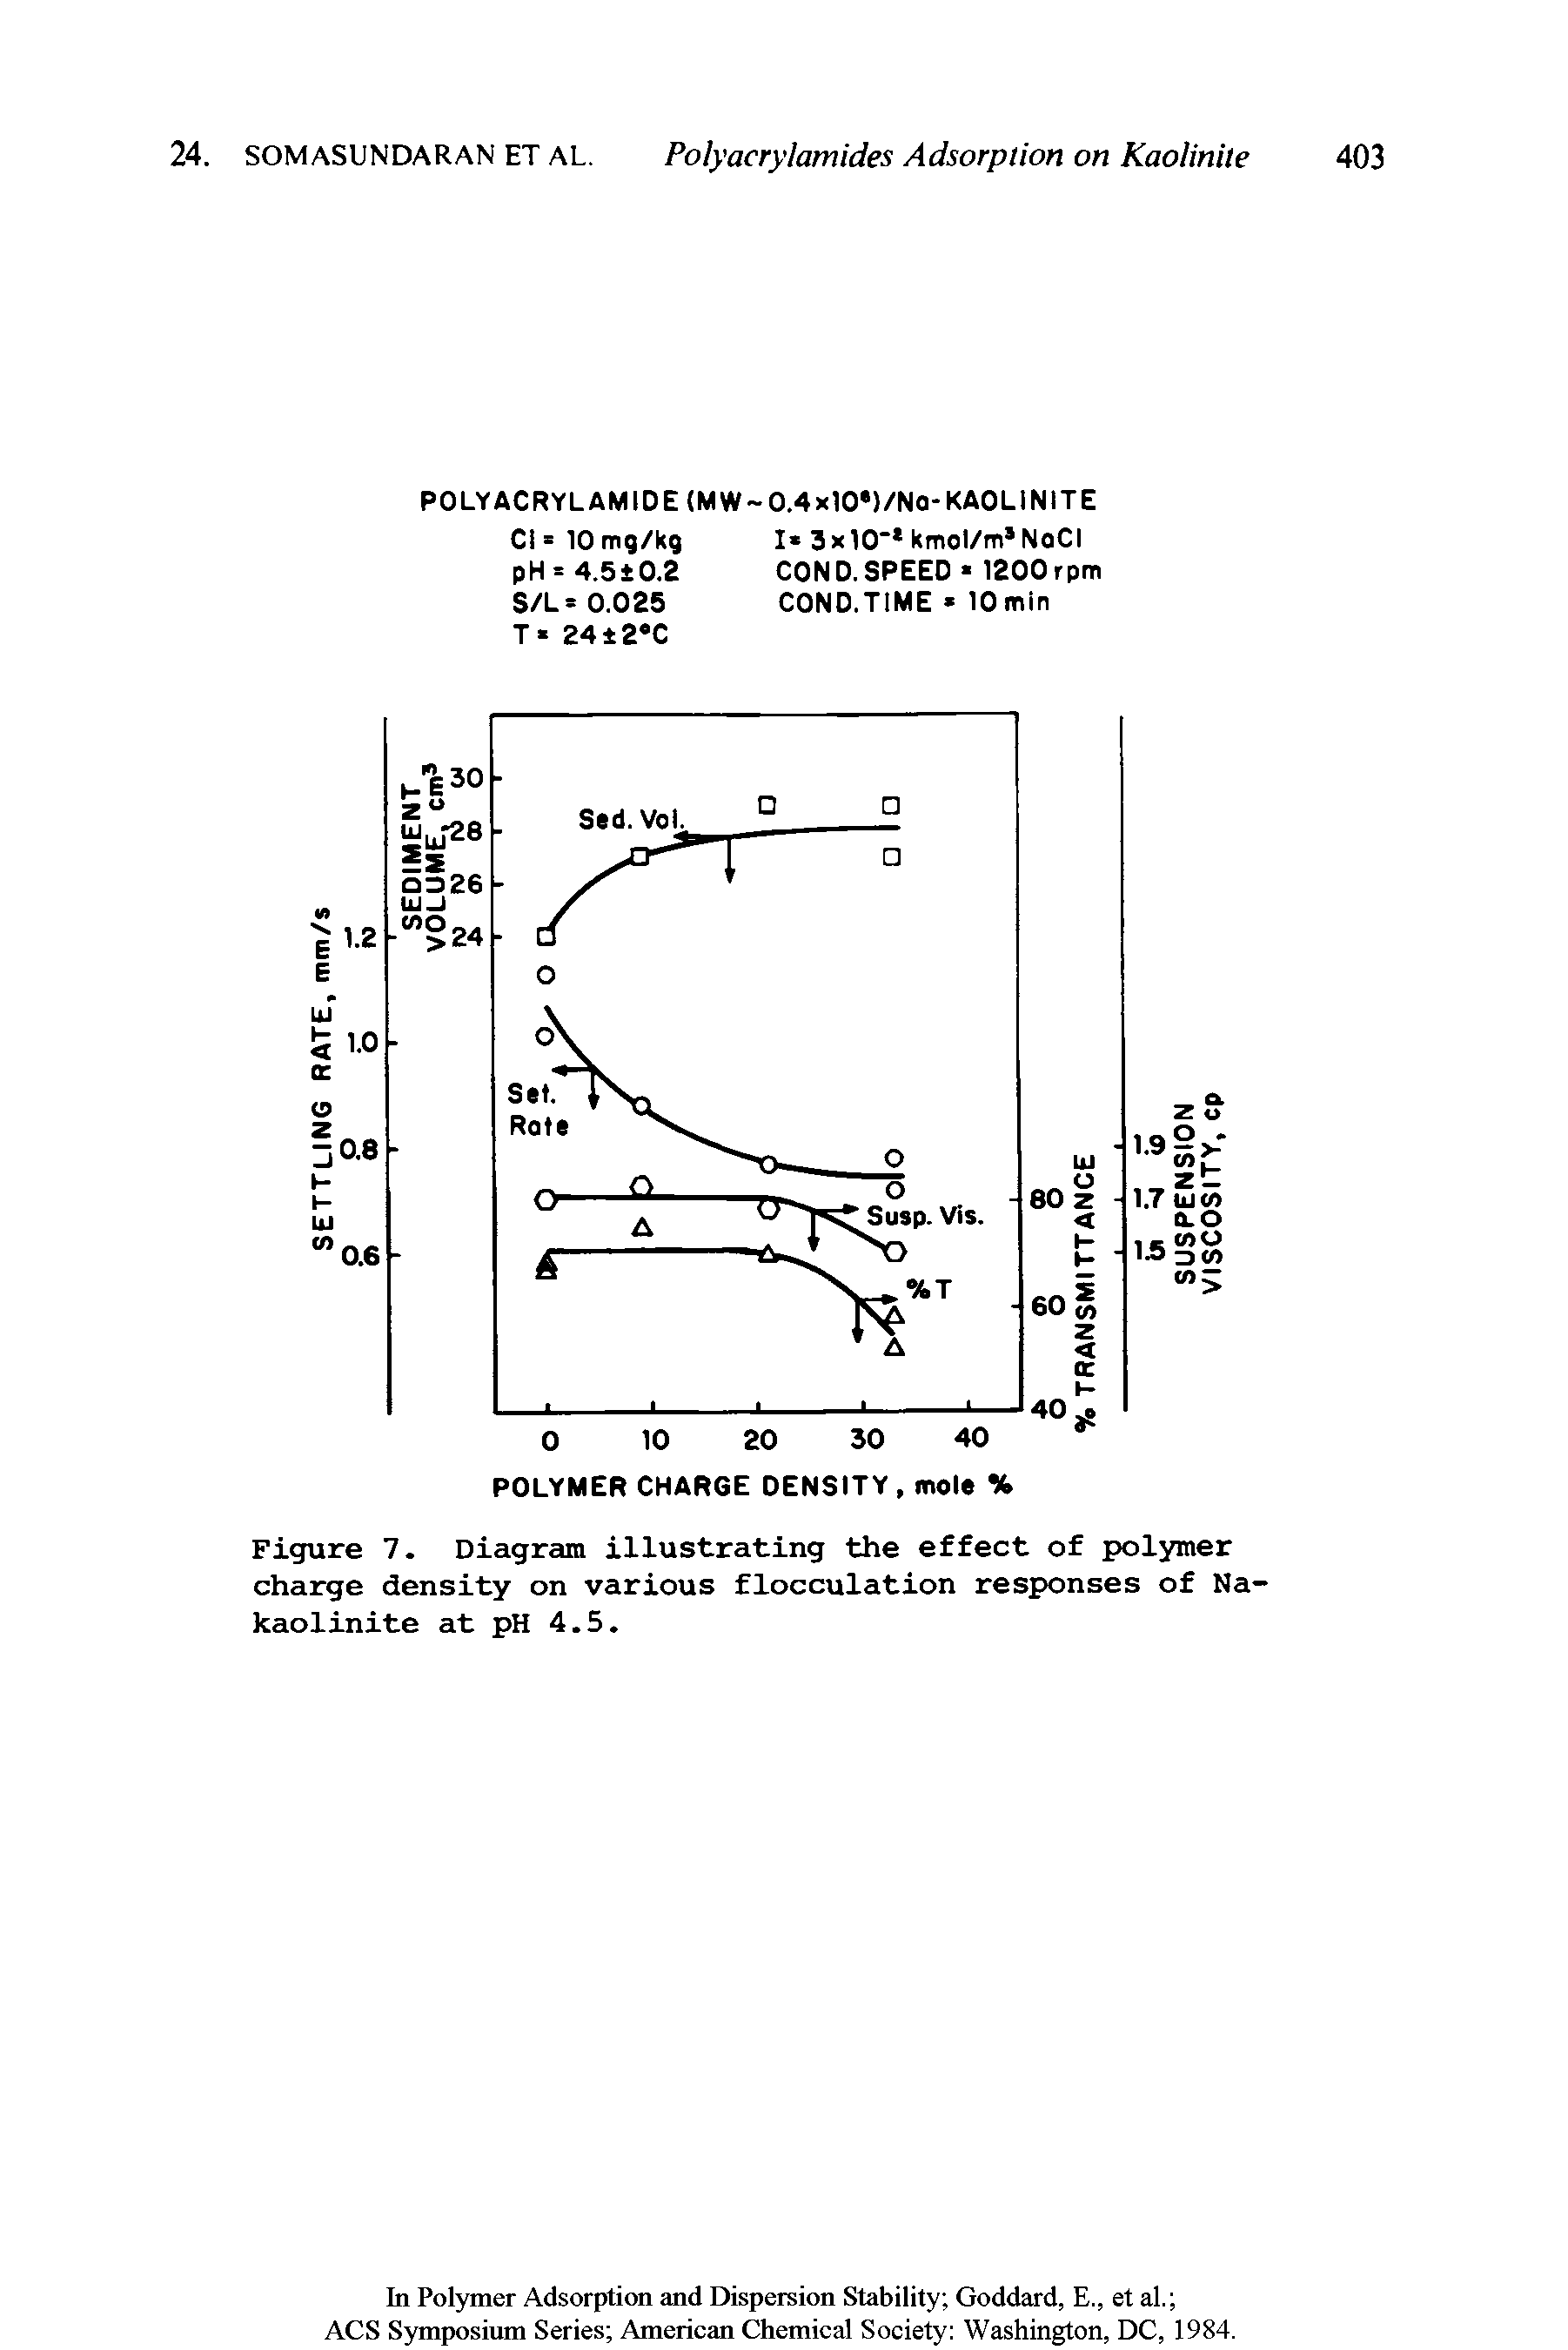 Figure 7. Diagram illustrating the effect of polymer charge density on various flocculation responses of Na-kaolinite at pH 4.5.